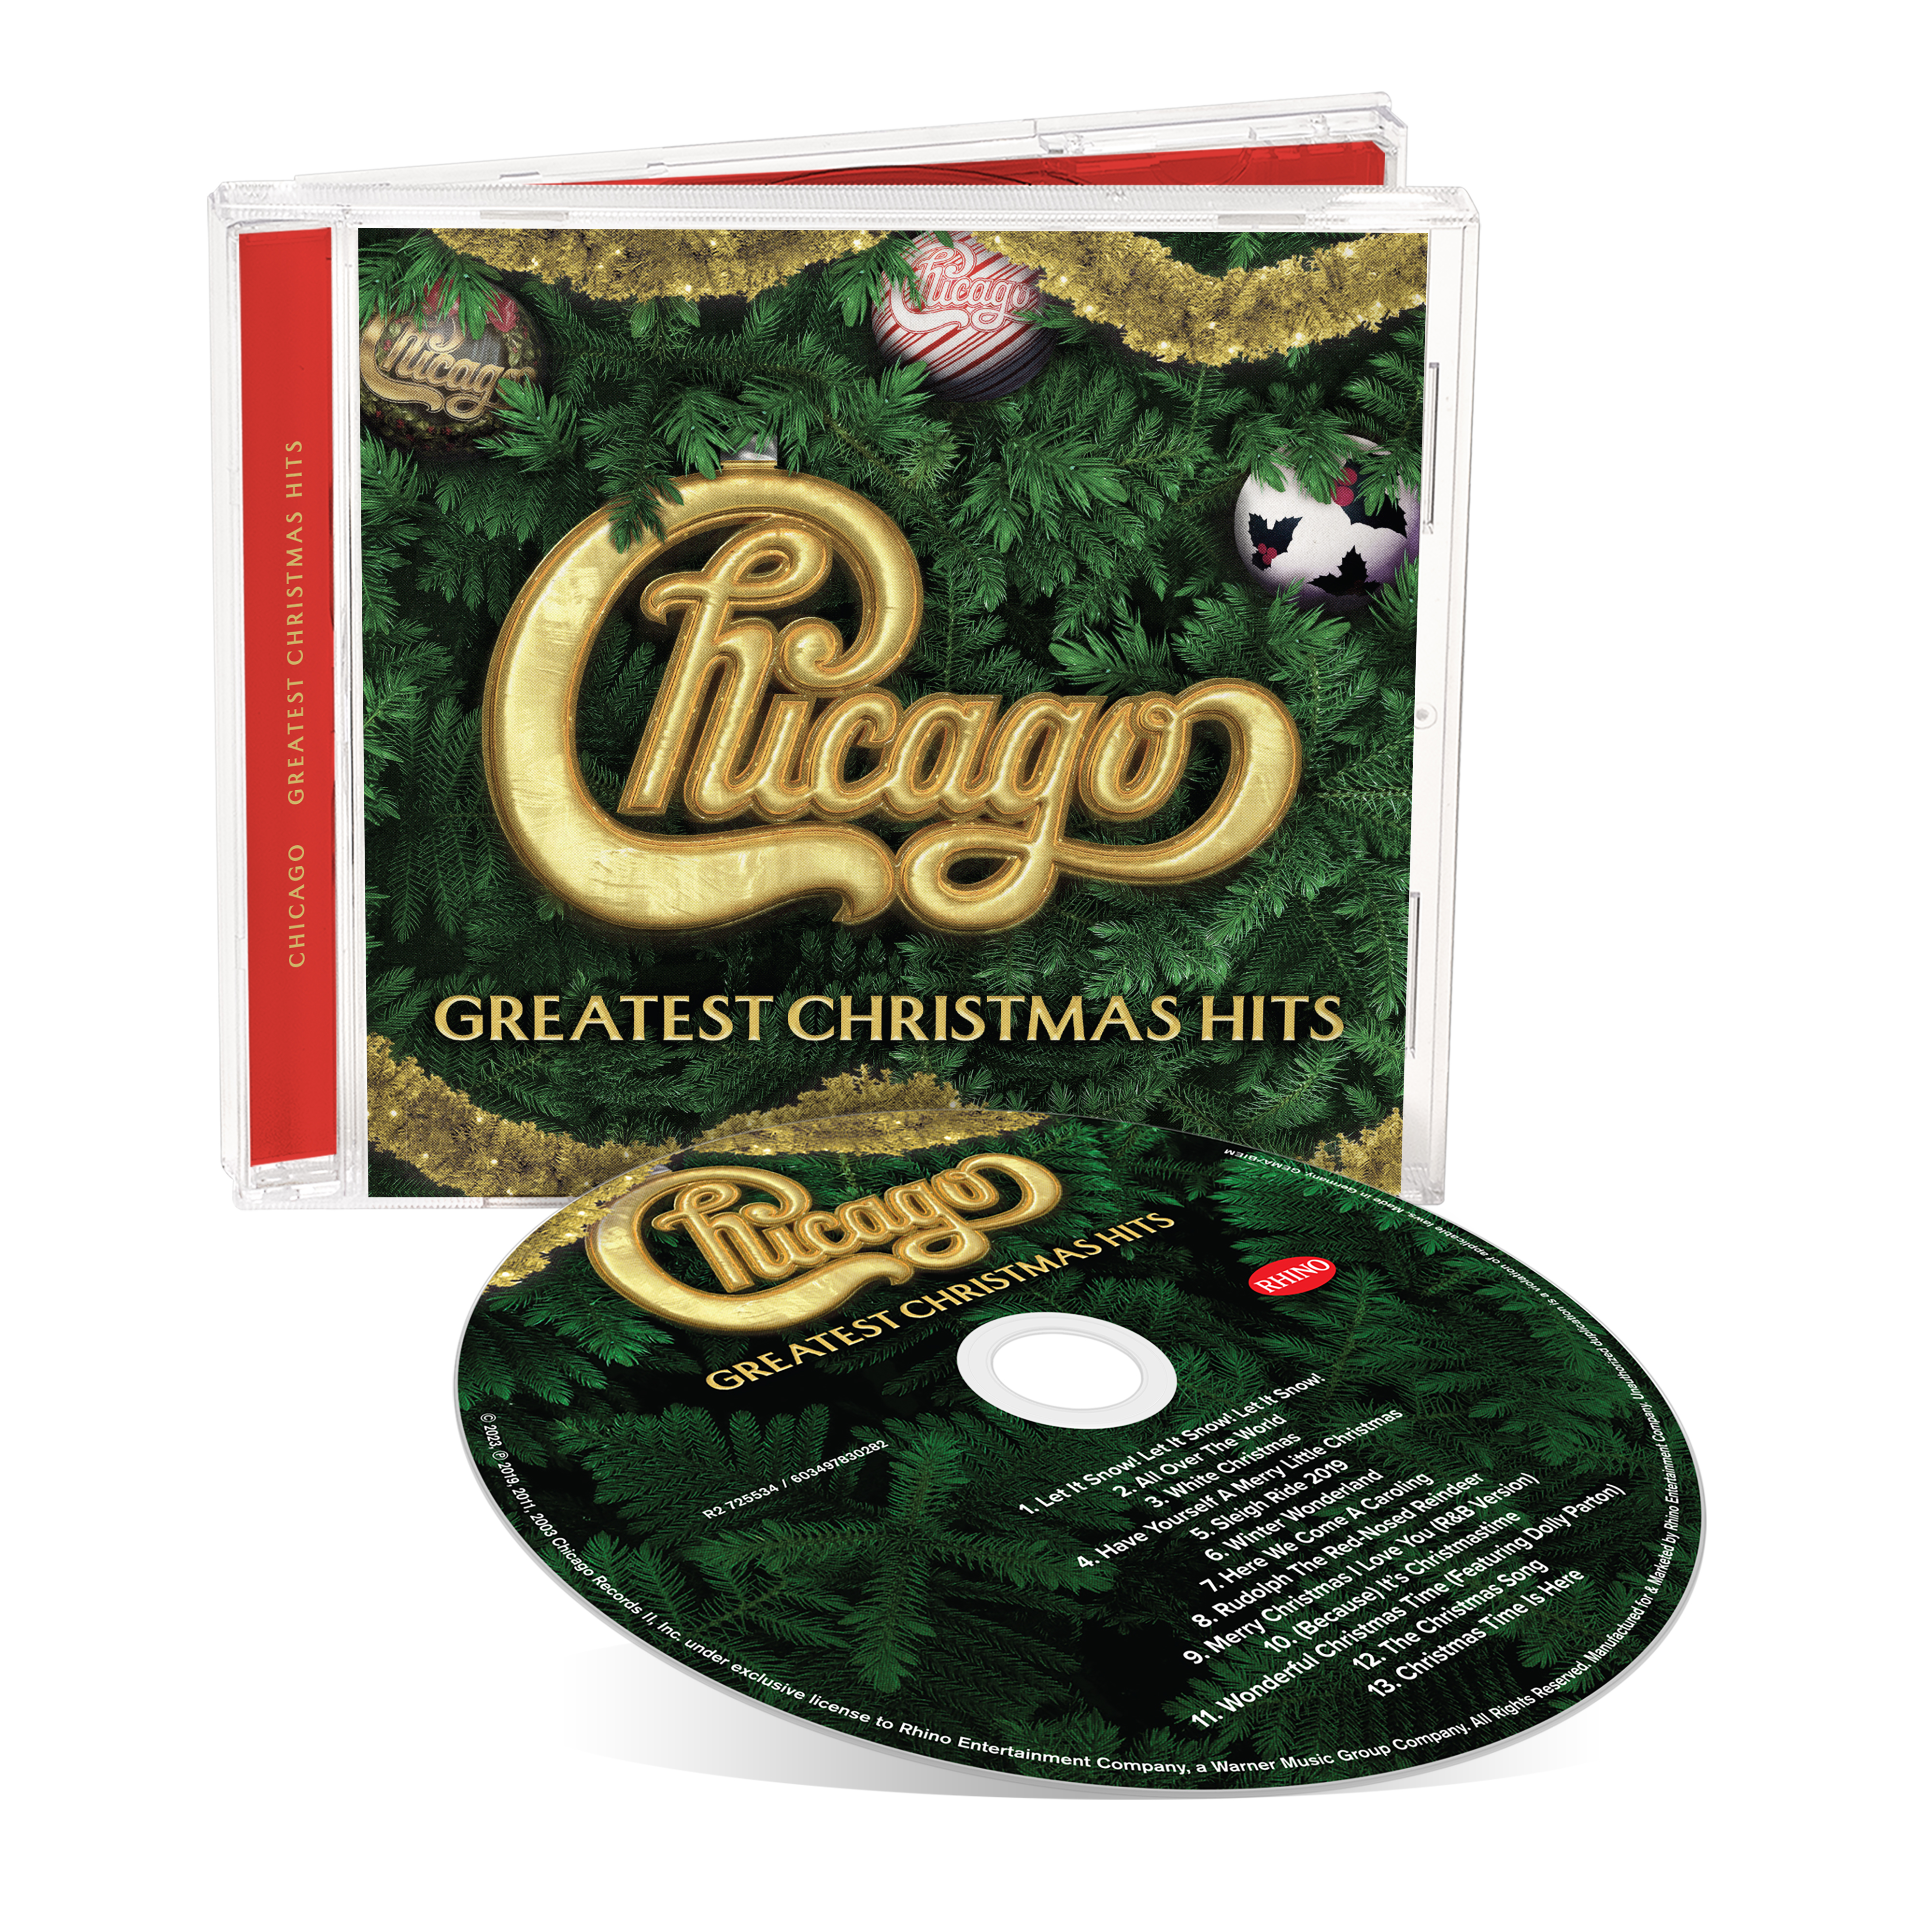 Chicago Greatest Christmas Hits OUT NOW! – Chicago